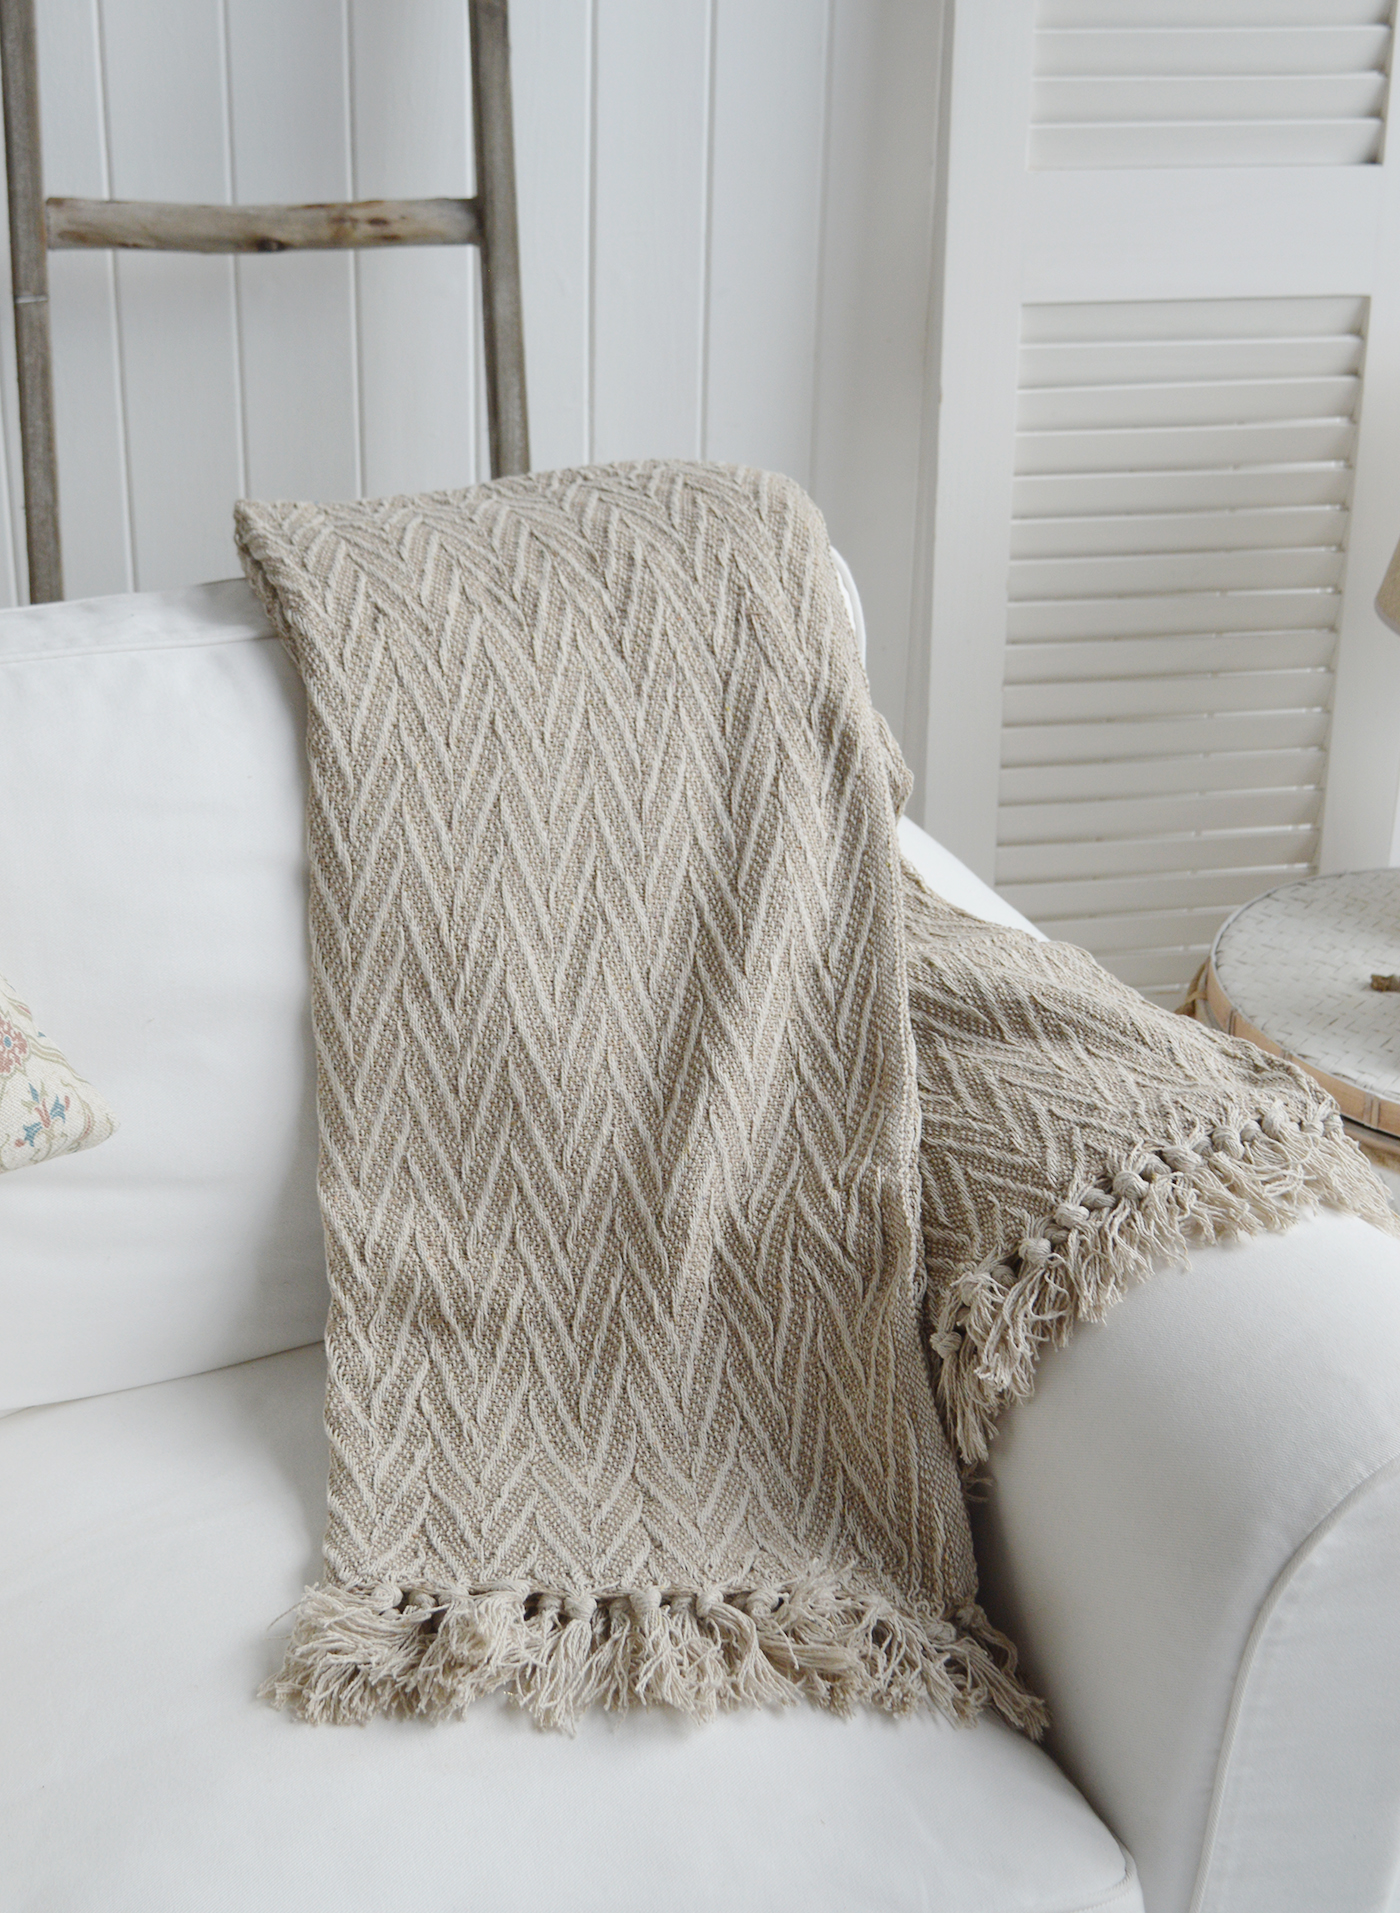 Stowe Throws, blankets for New England Style Interiors -  Neutral Beige Stripe